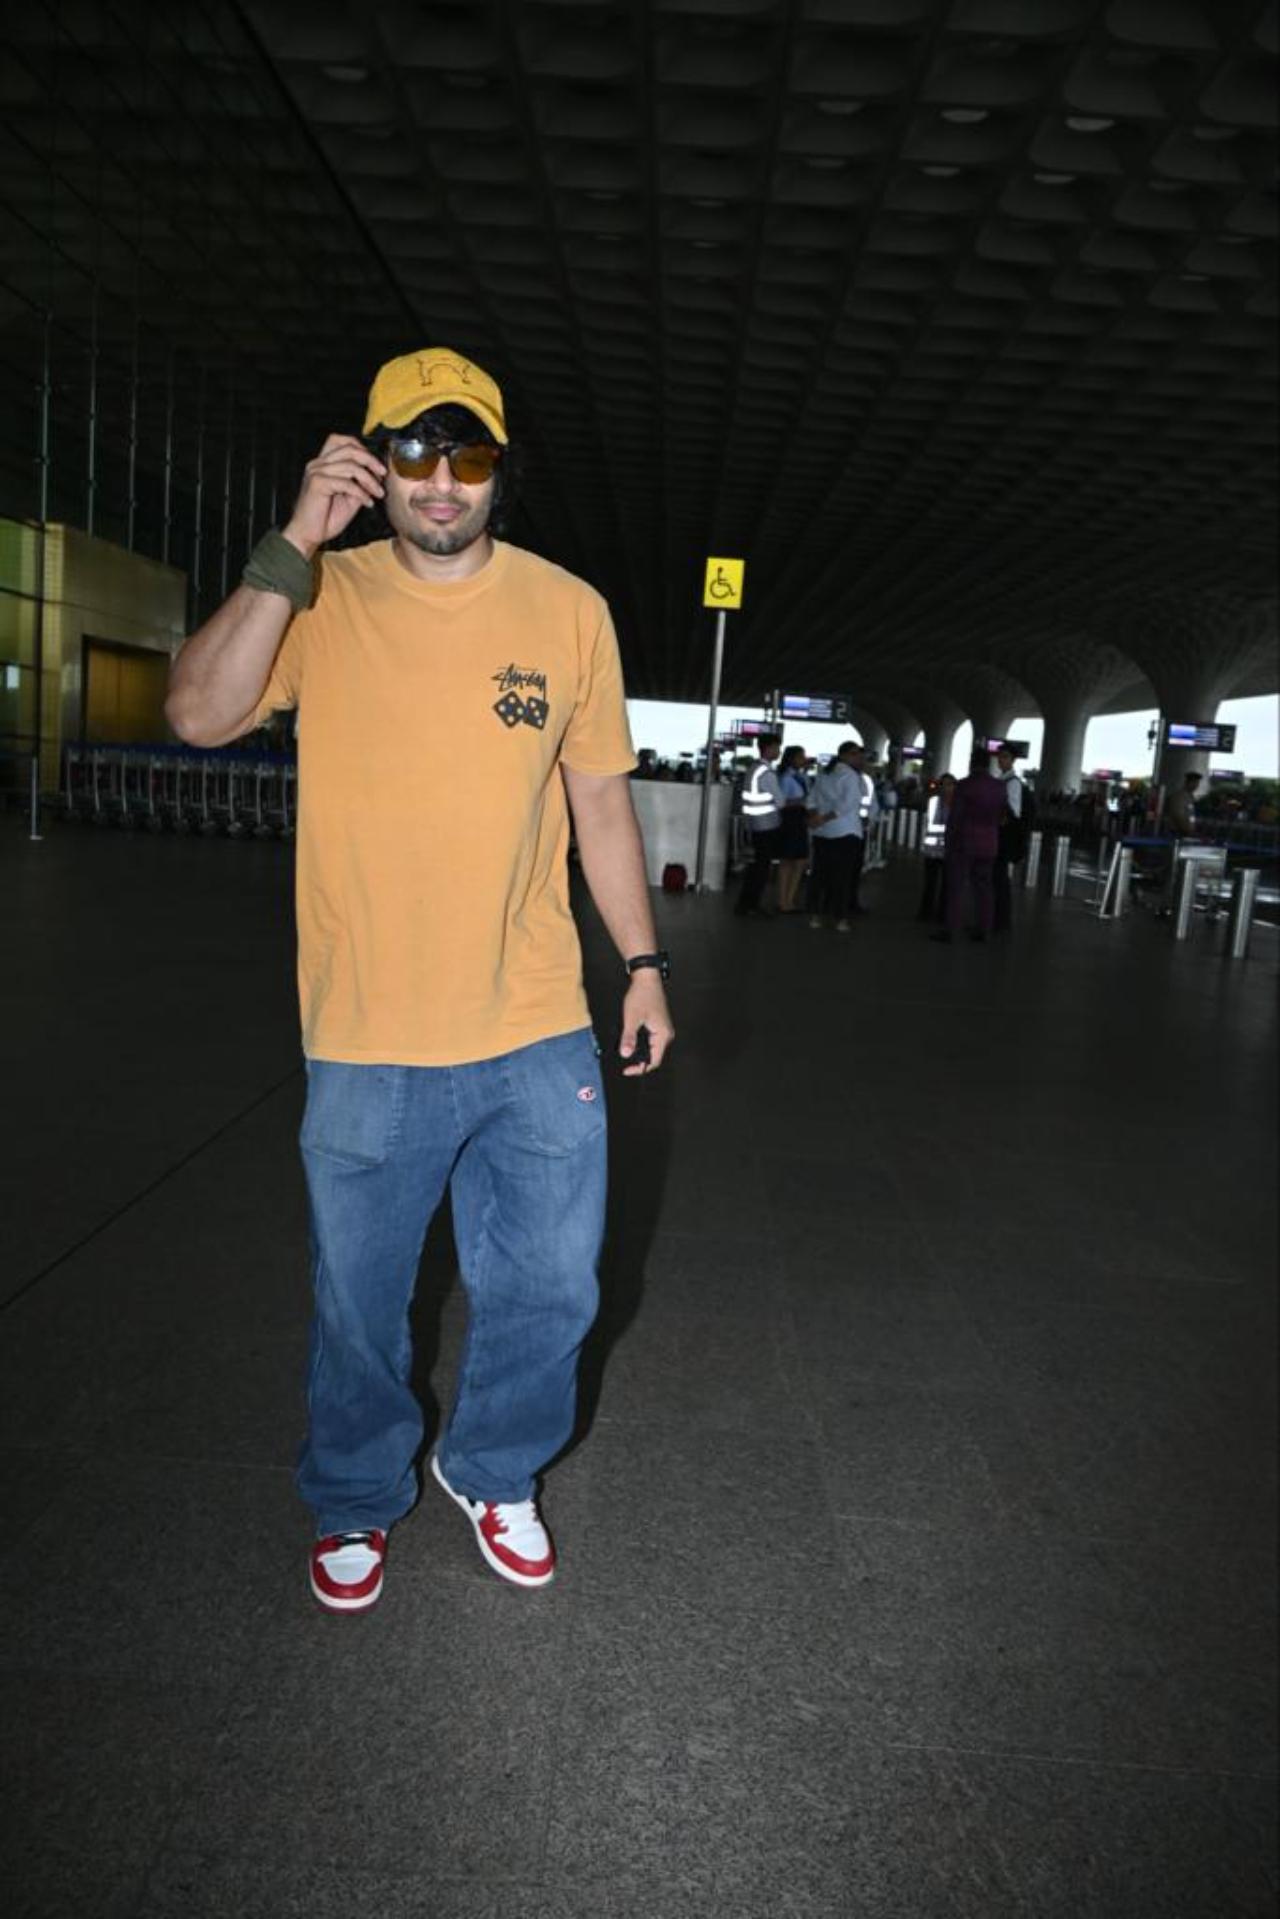 Ali Fazal was spotted at the airport. The actor was wearing an orange t-shirt and blue denim 